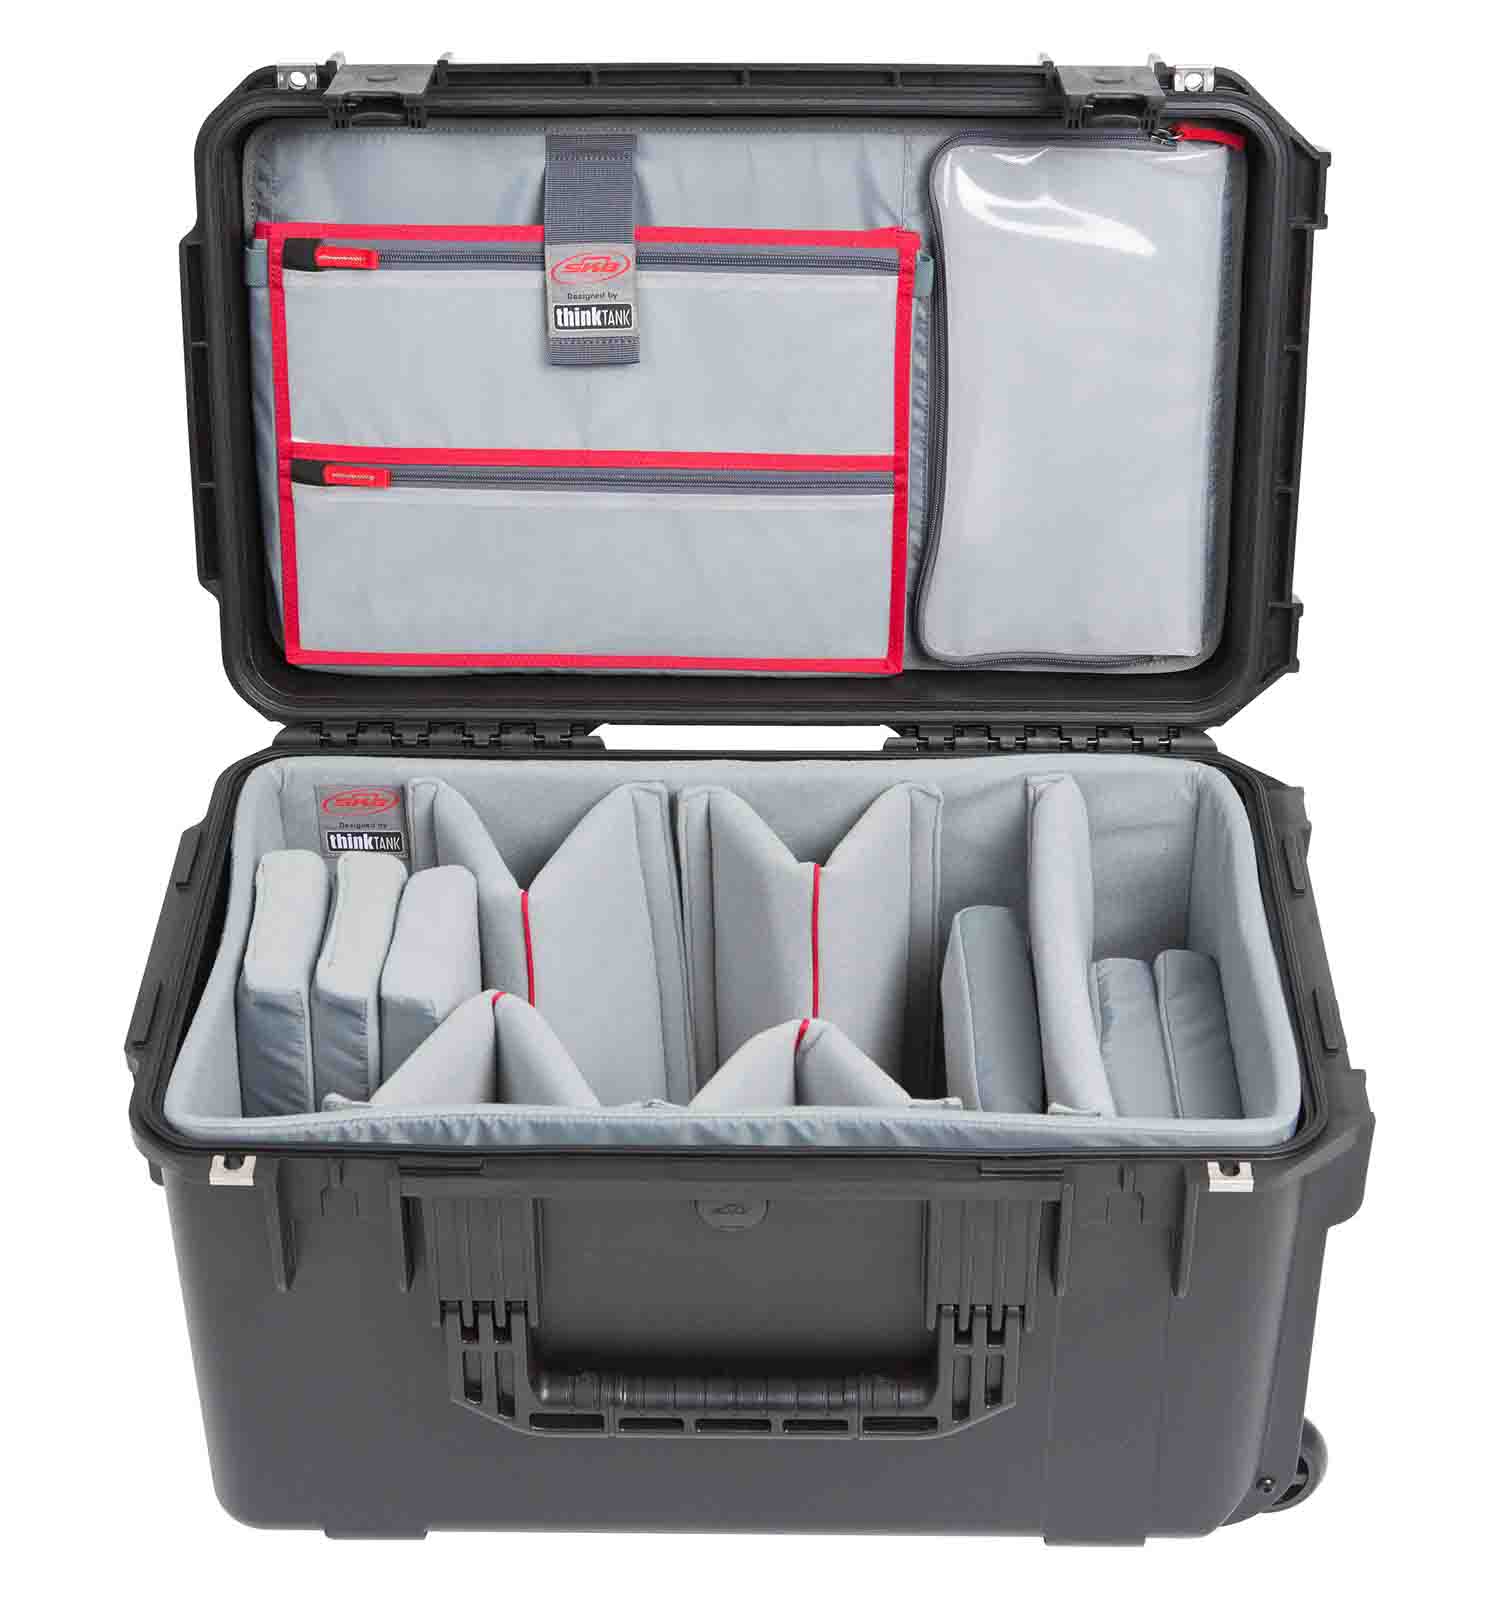 SKB Cases 3i-2213-12DL iSeries 2213-12 Case with Think Tank Video Dividers and Lid Organizer - Black - Hollywood DJ